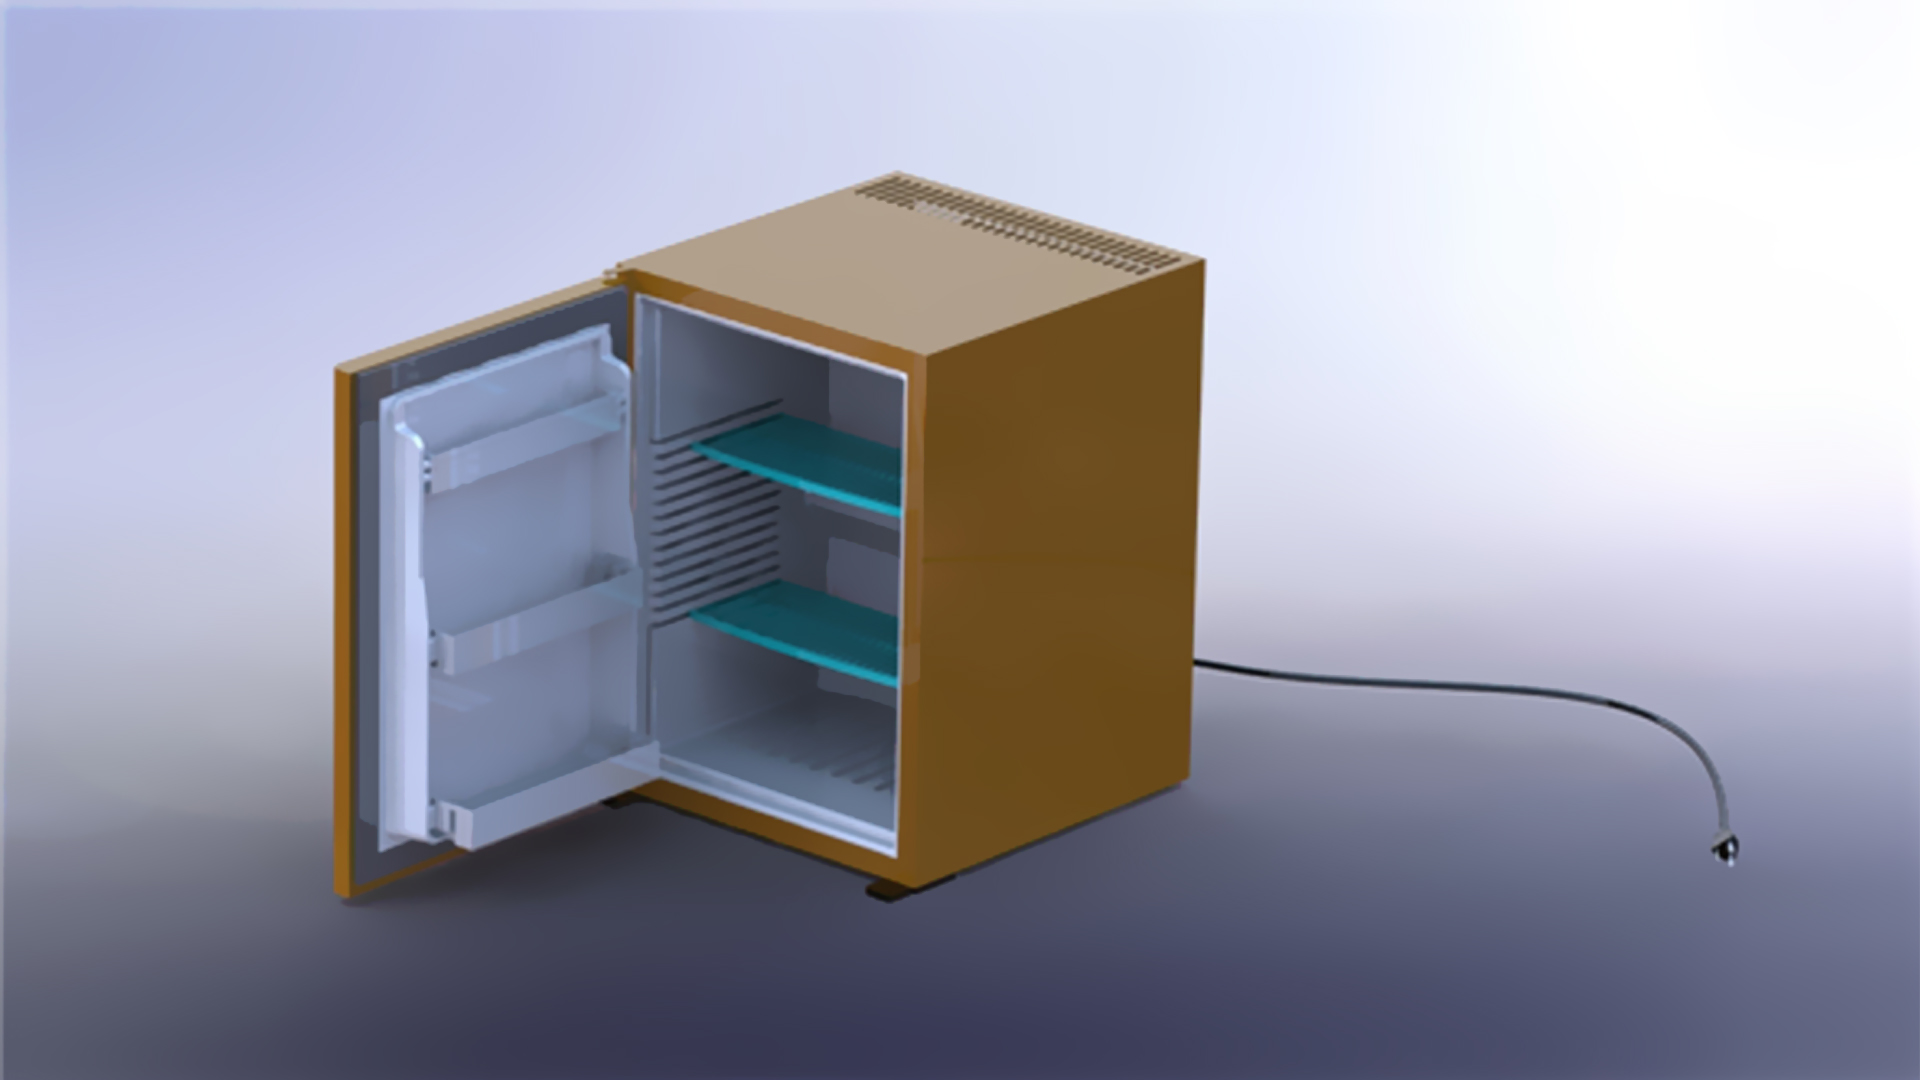 Customized Refrigeration Solutions: Industrial-grade 3D Printers Create Personalized 3D Printed Refrigerator Prototype Models